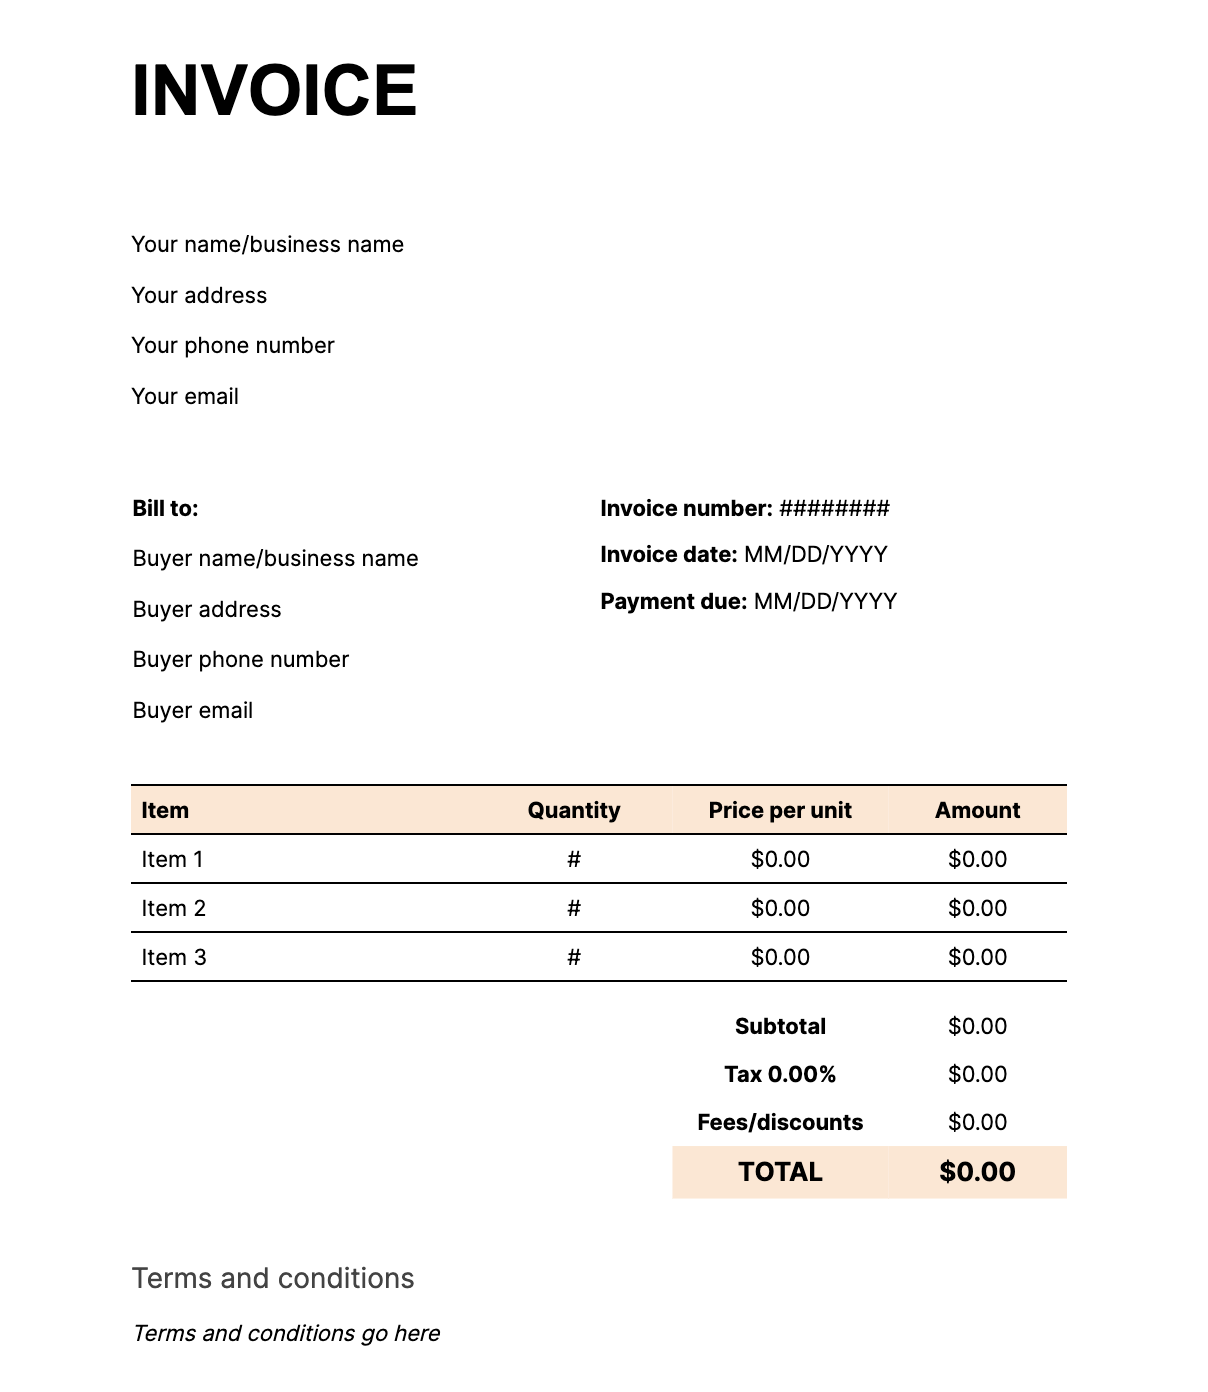 invoice paid in full